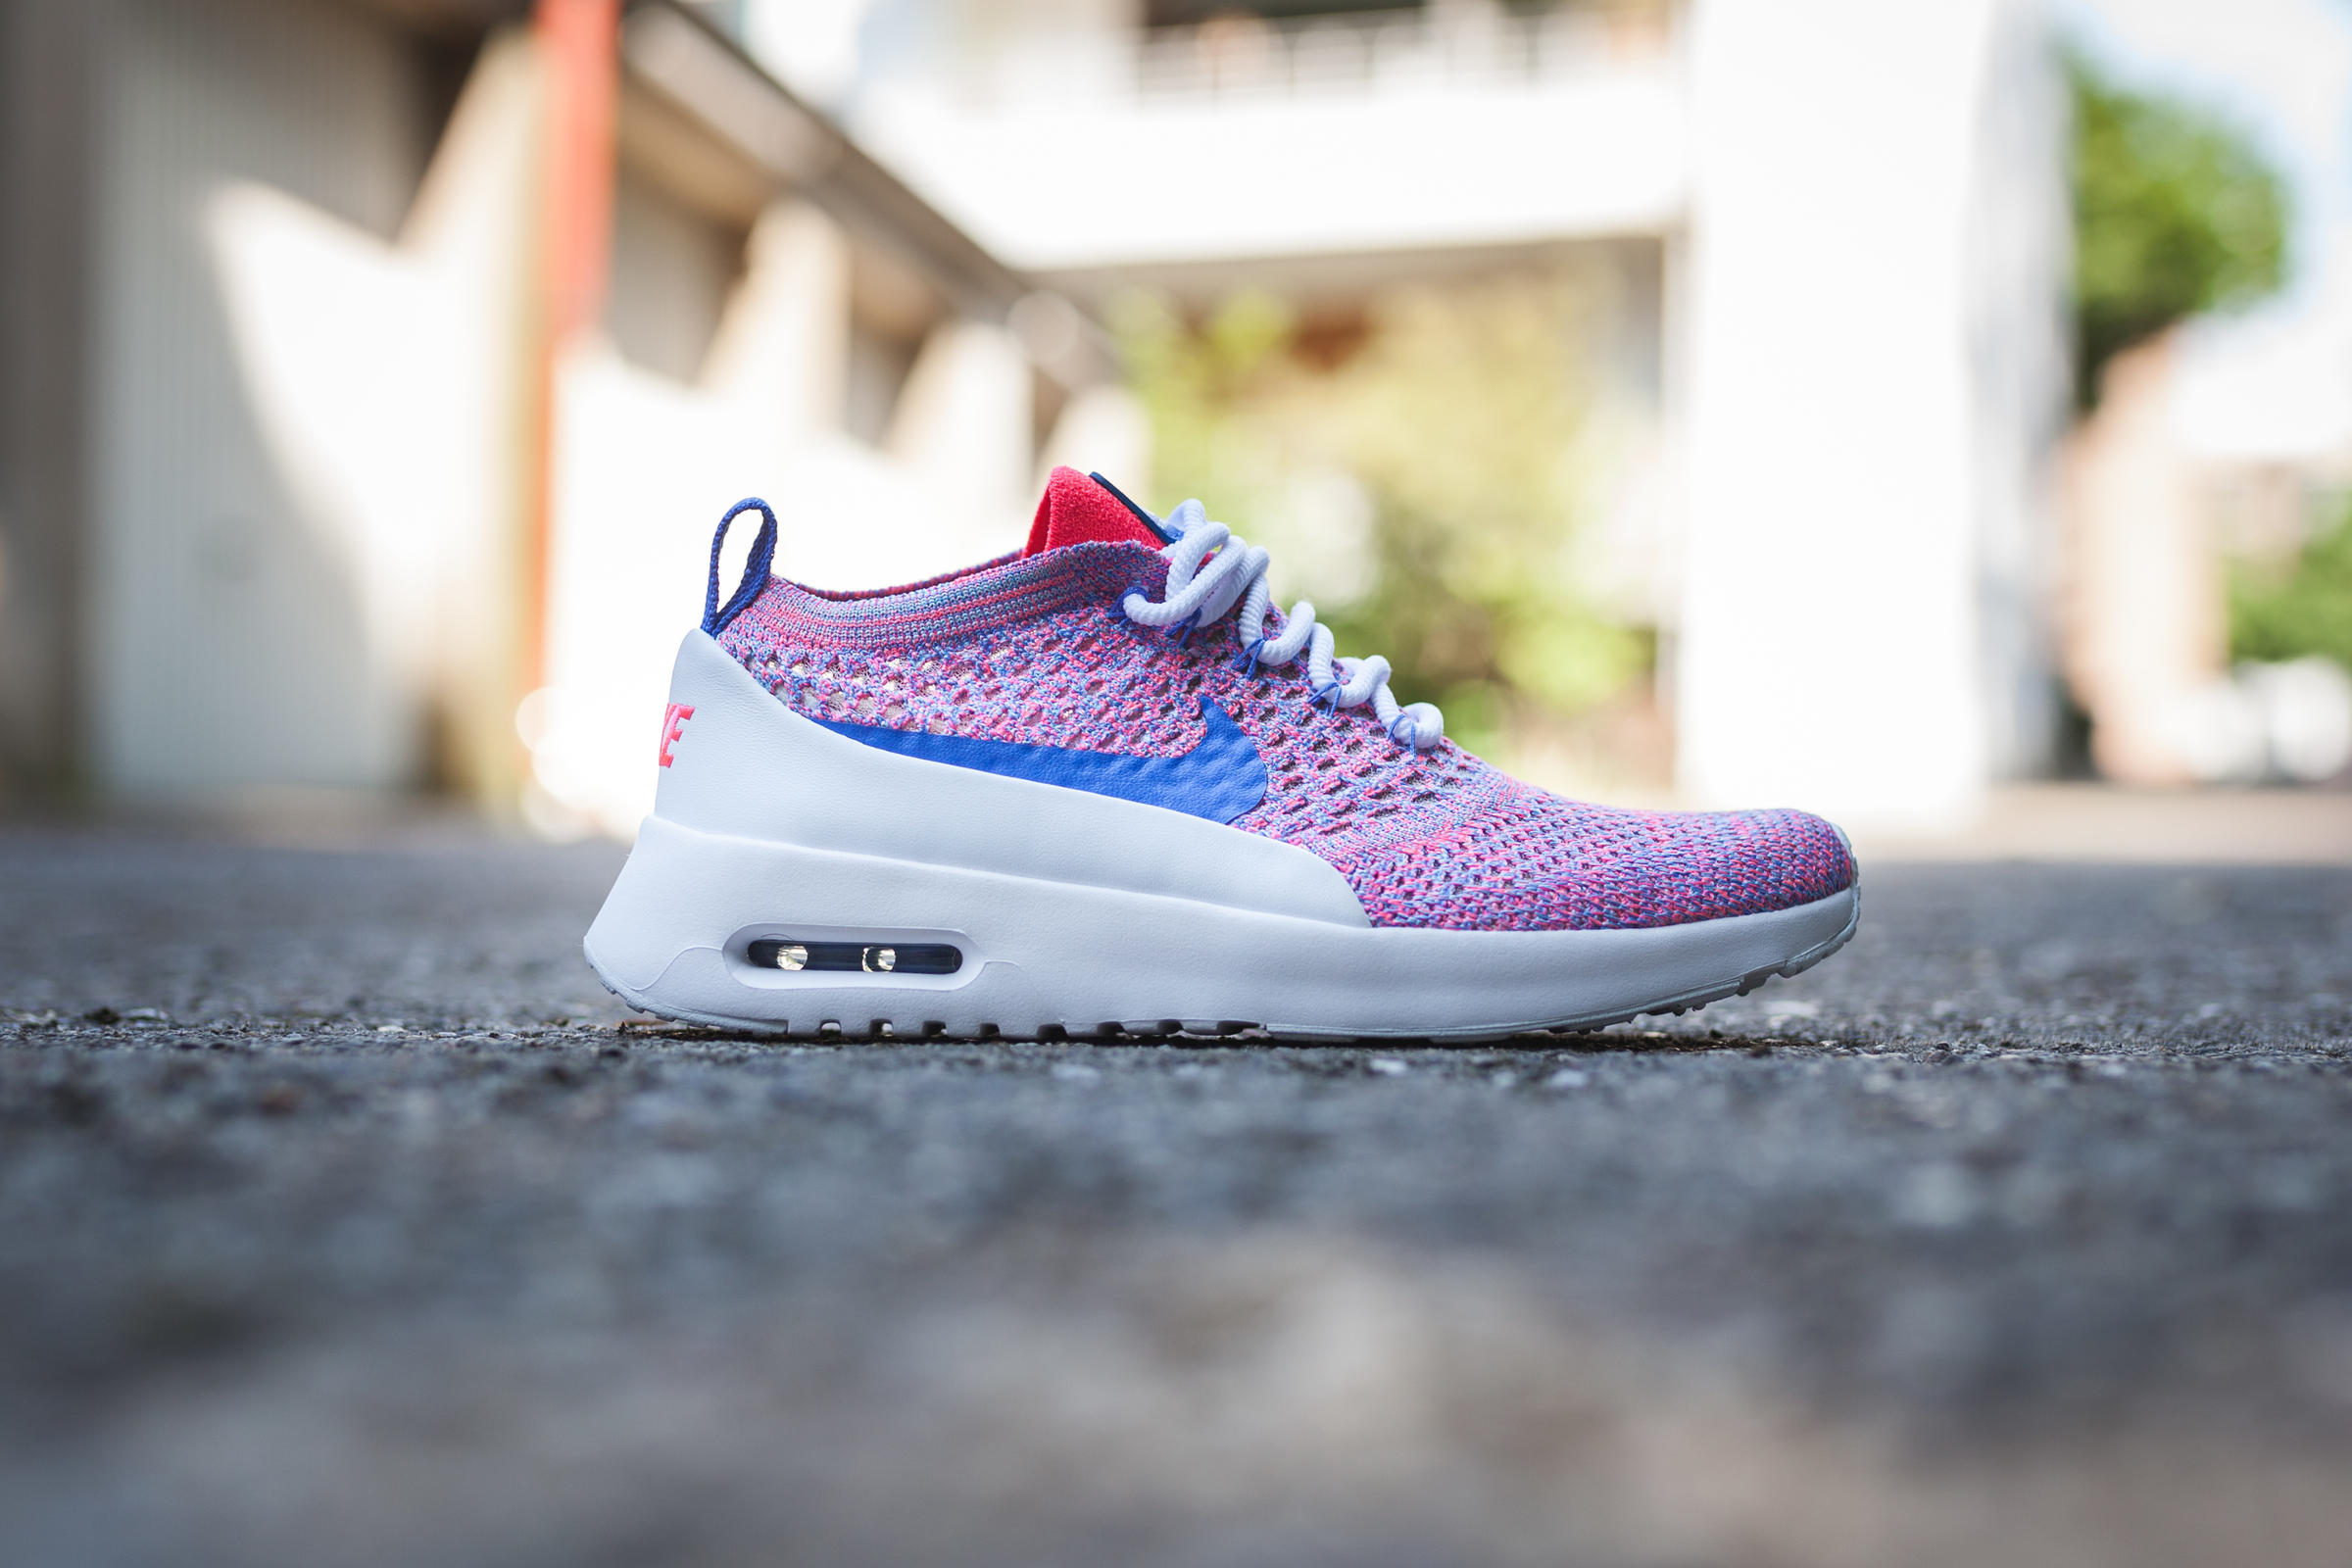 Nike Wmns Air Max Thea Ultra Flyknit "White"